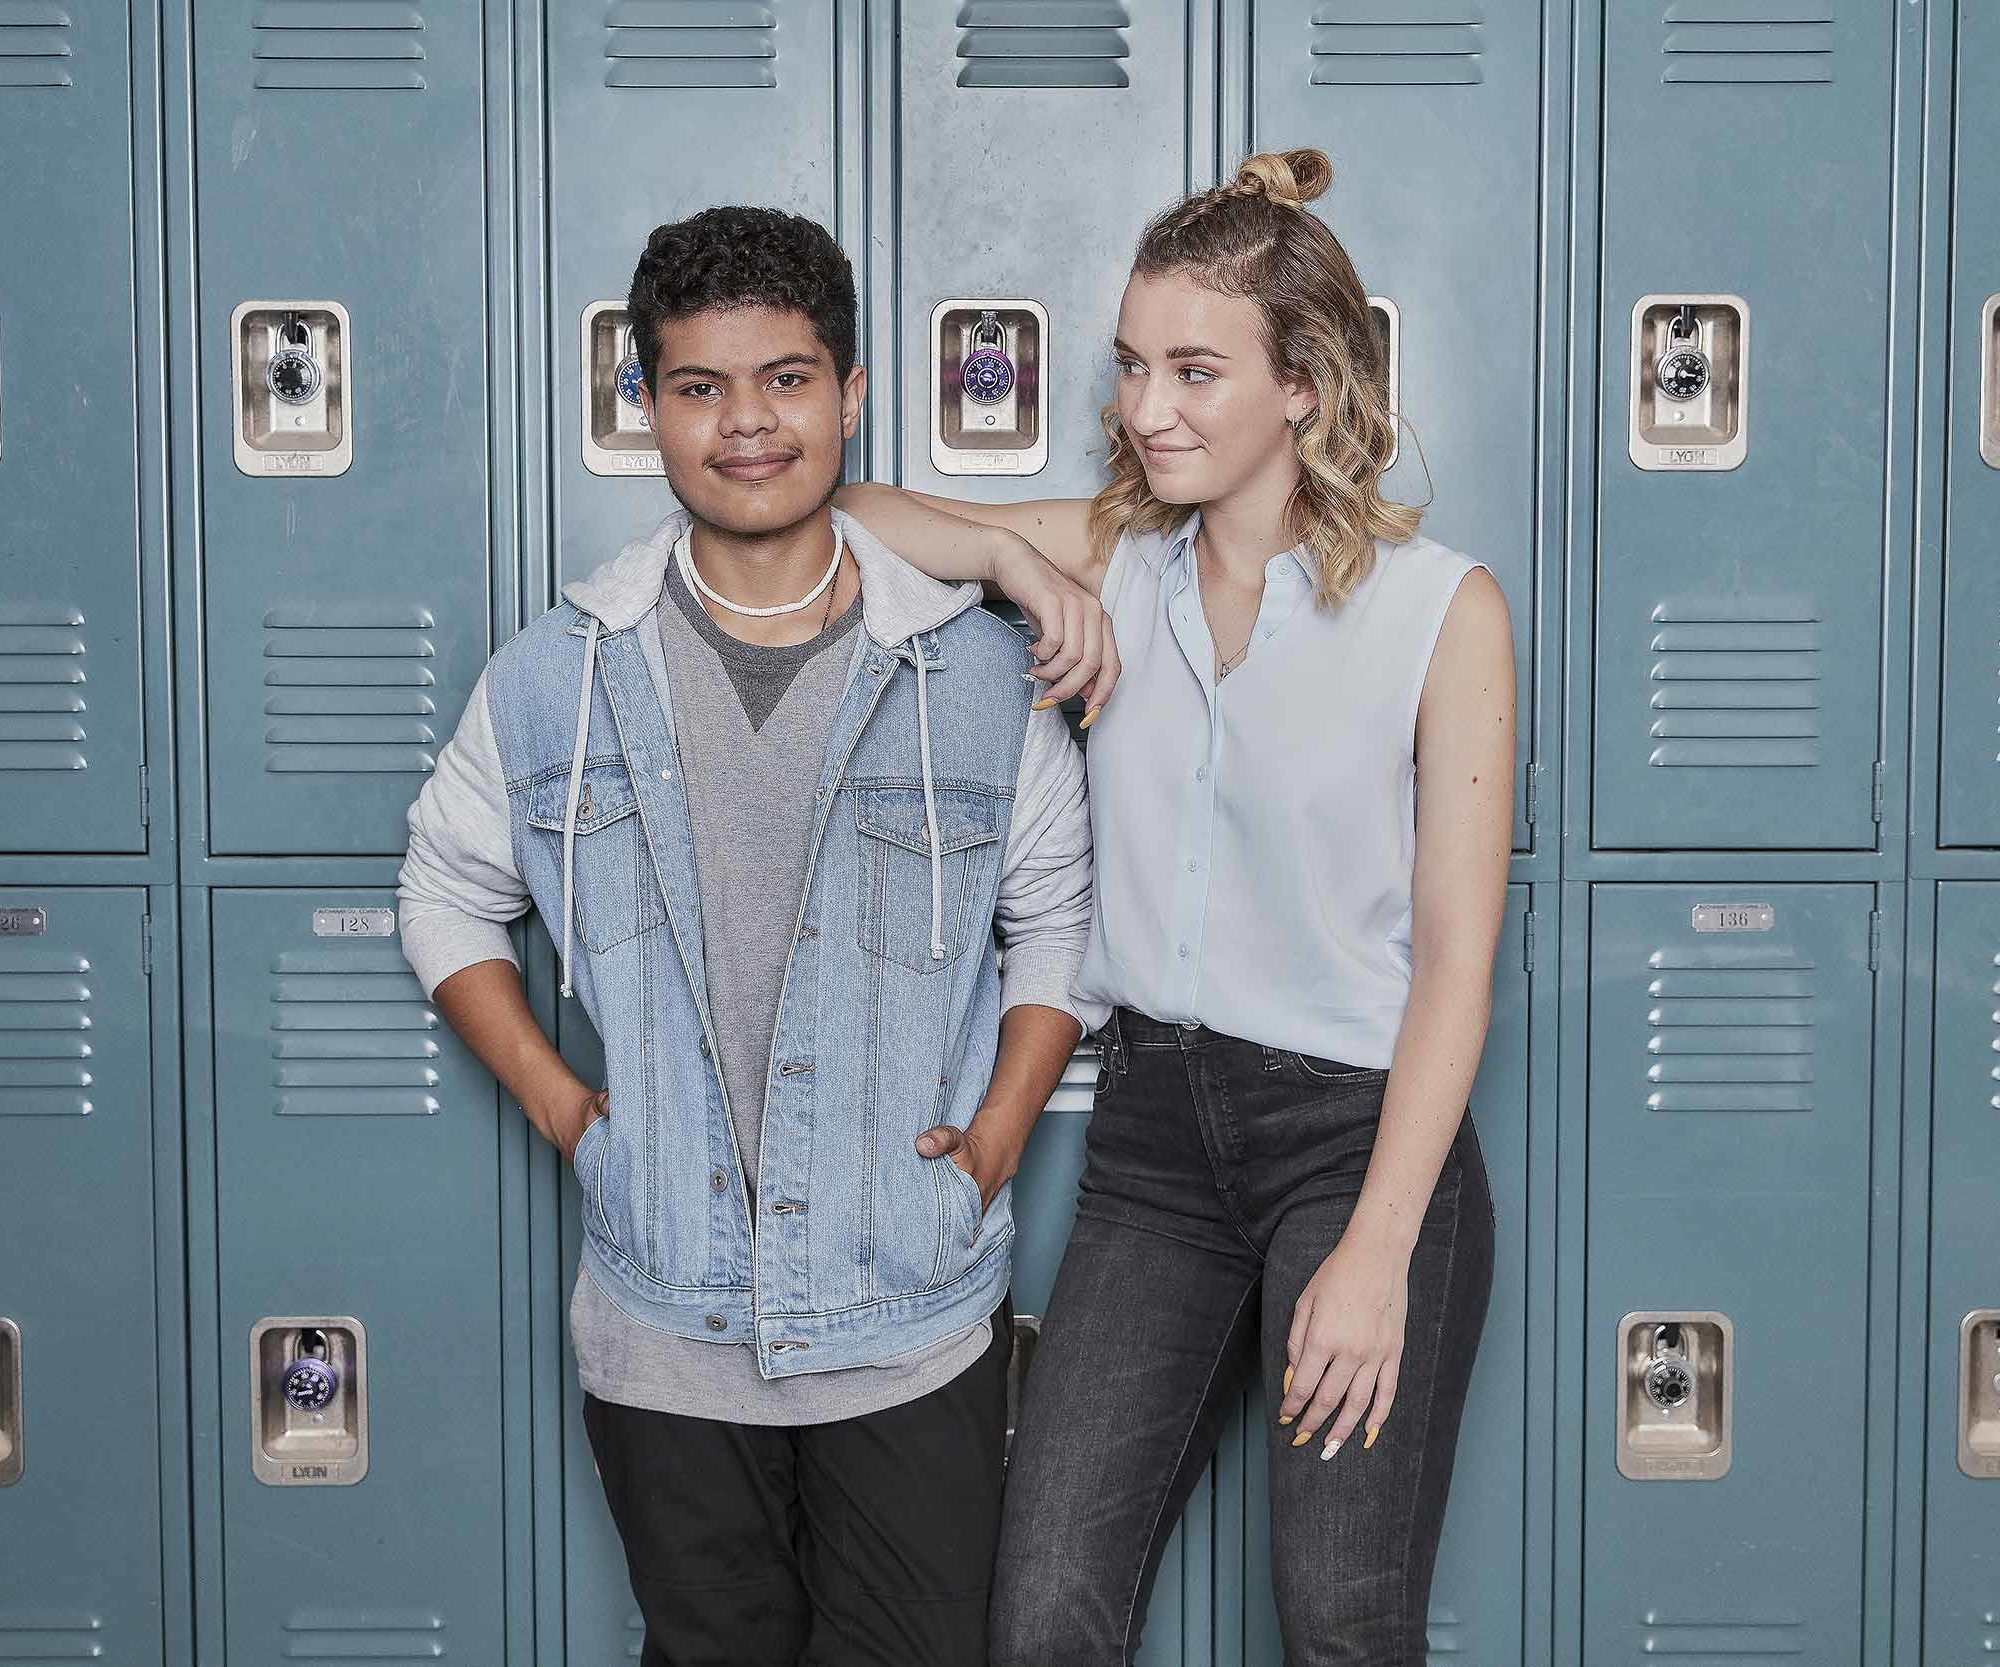 Two students standing in front of lockers.